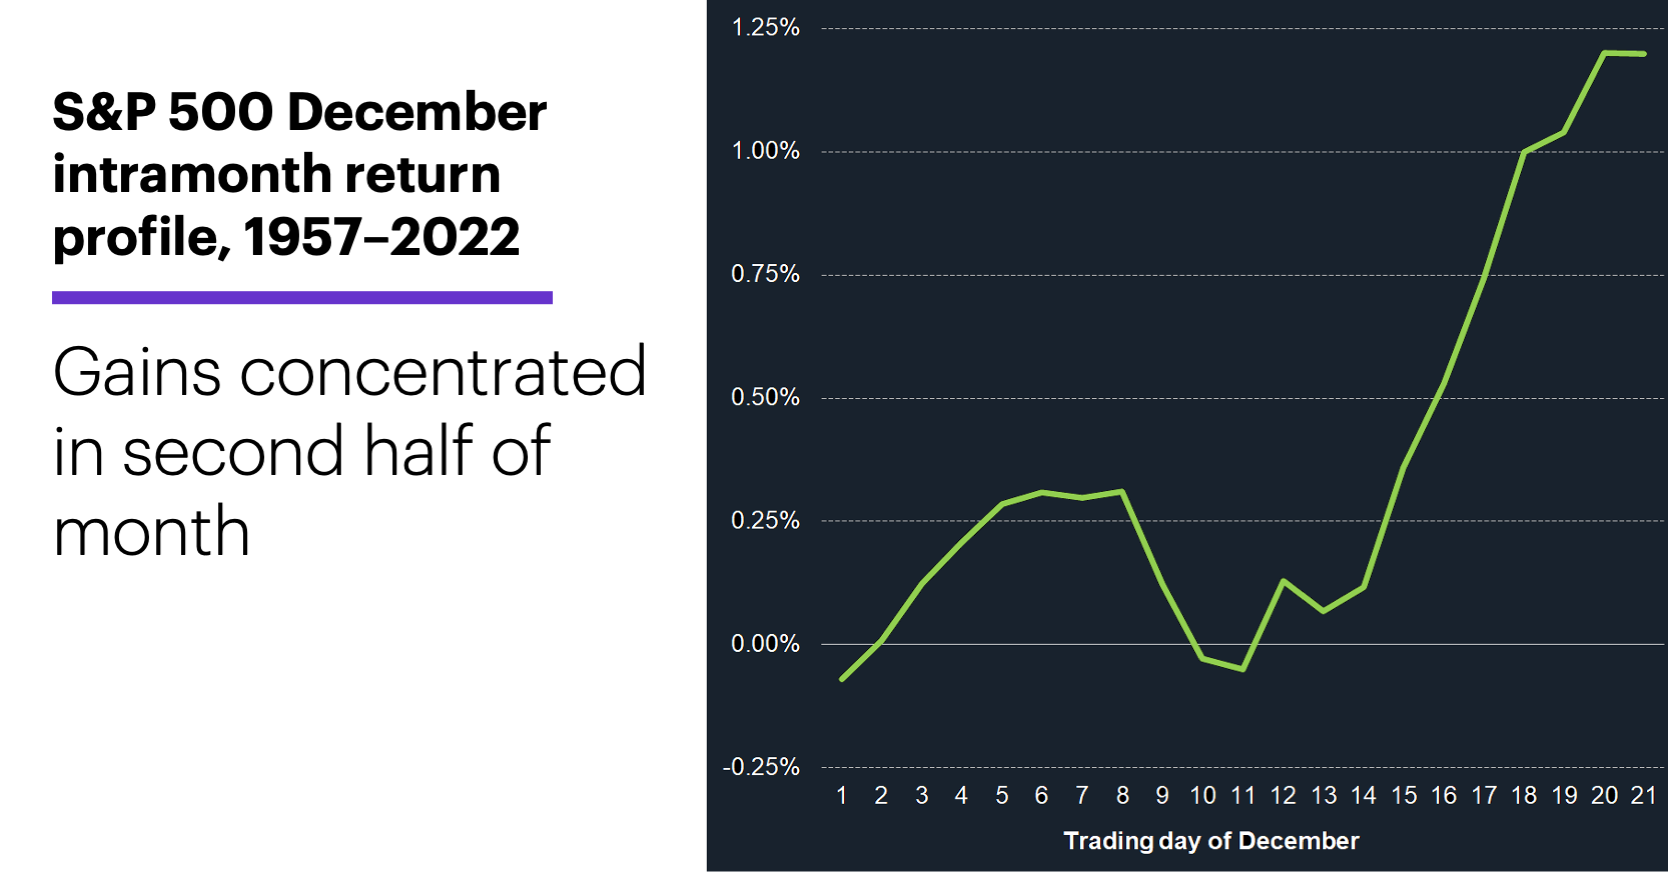 Chart 1: S&P 500 December intramonth return profile, 1957–2022. Gains concentrated in second half of month.